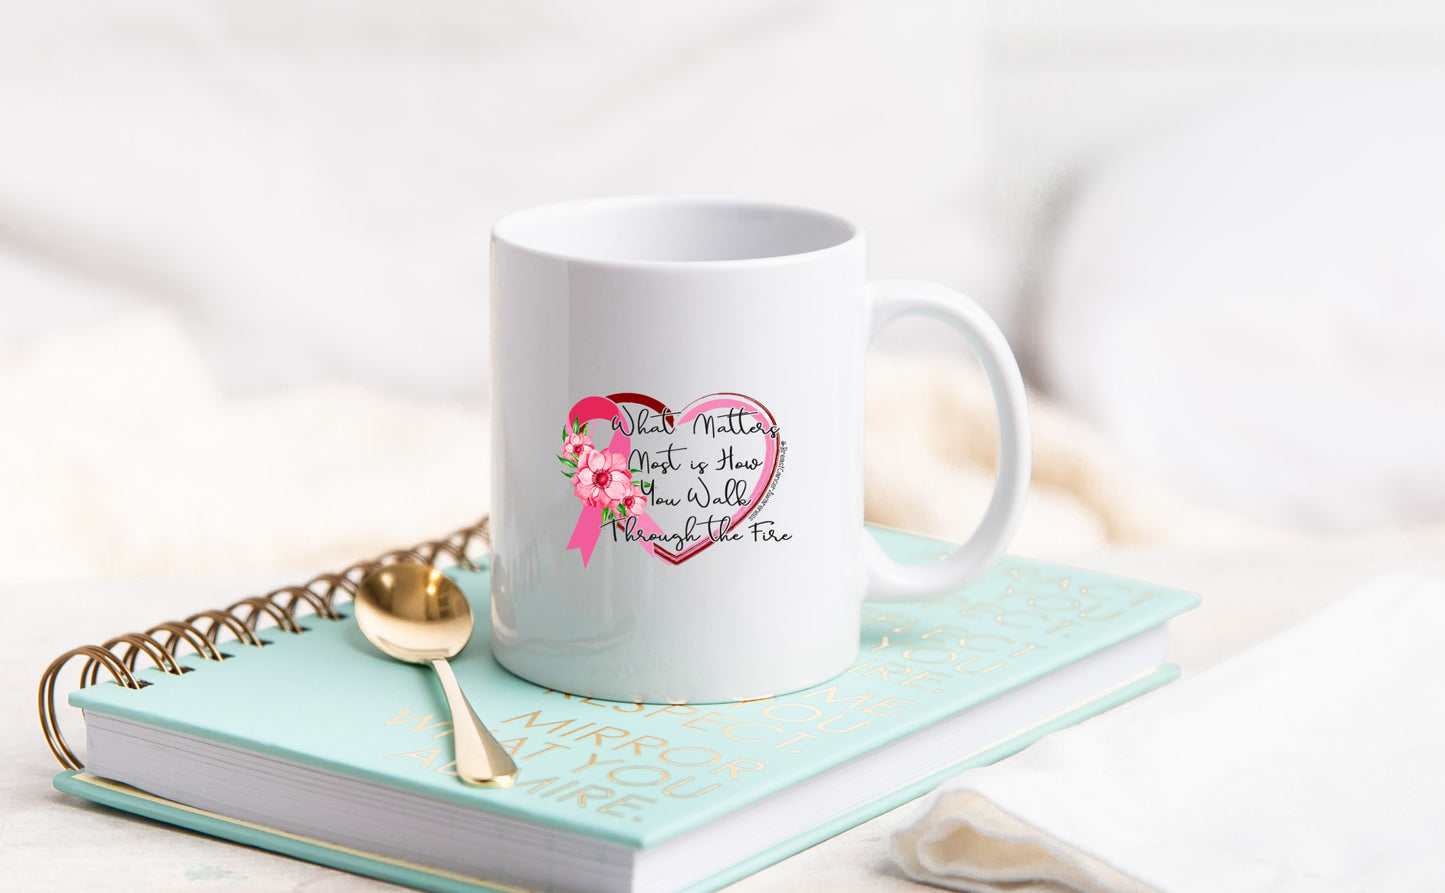 What Matters Most Breast Cancer 11oz Coffee Mug